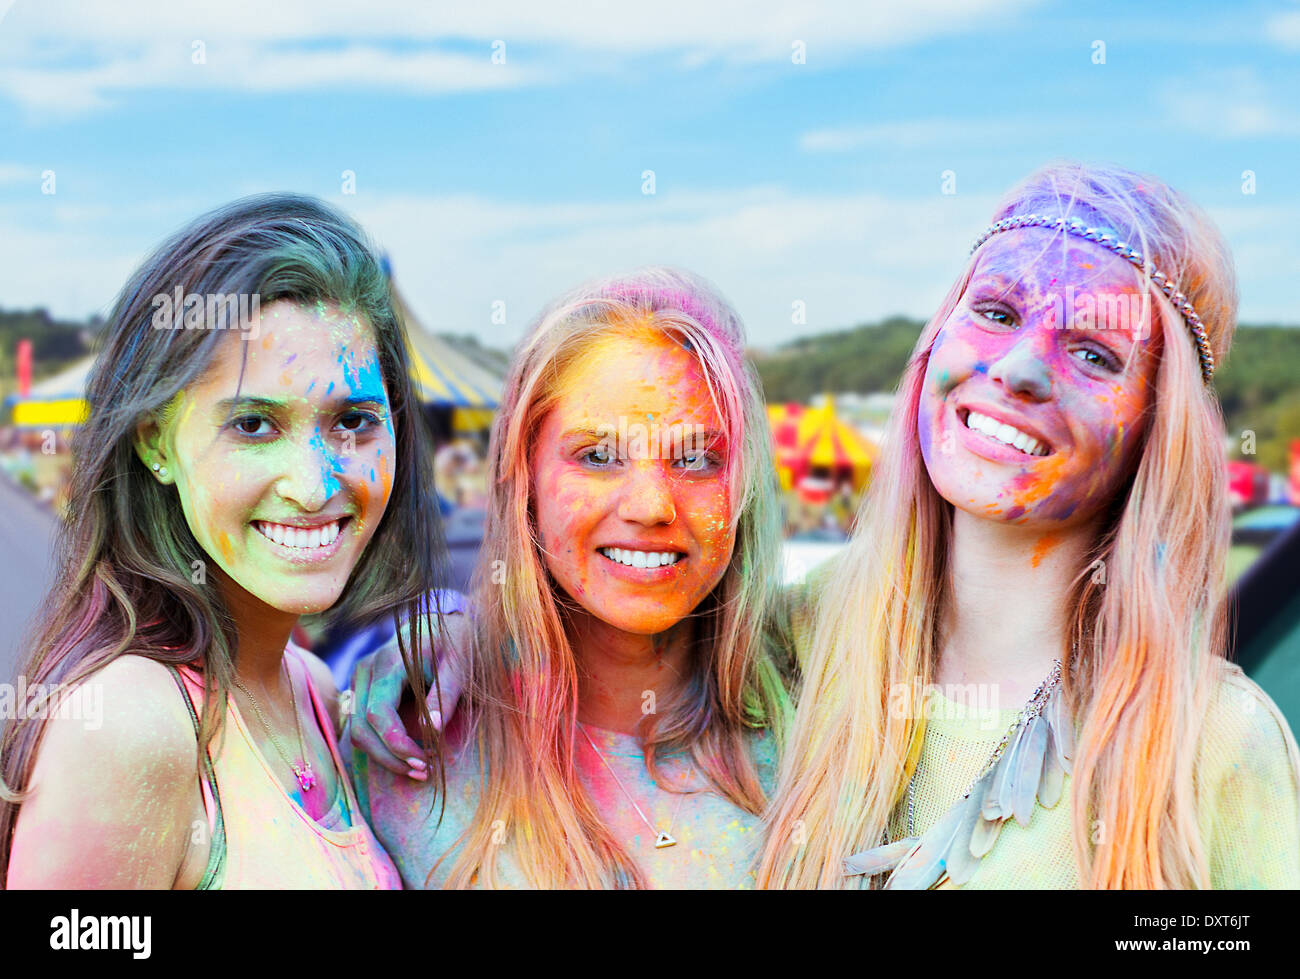 Portrait of smiling women covered in chalk dye at music festival Stock Photo